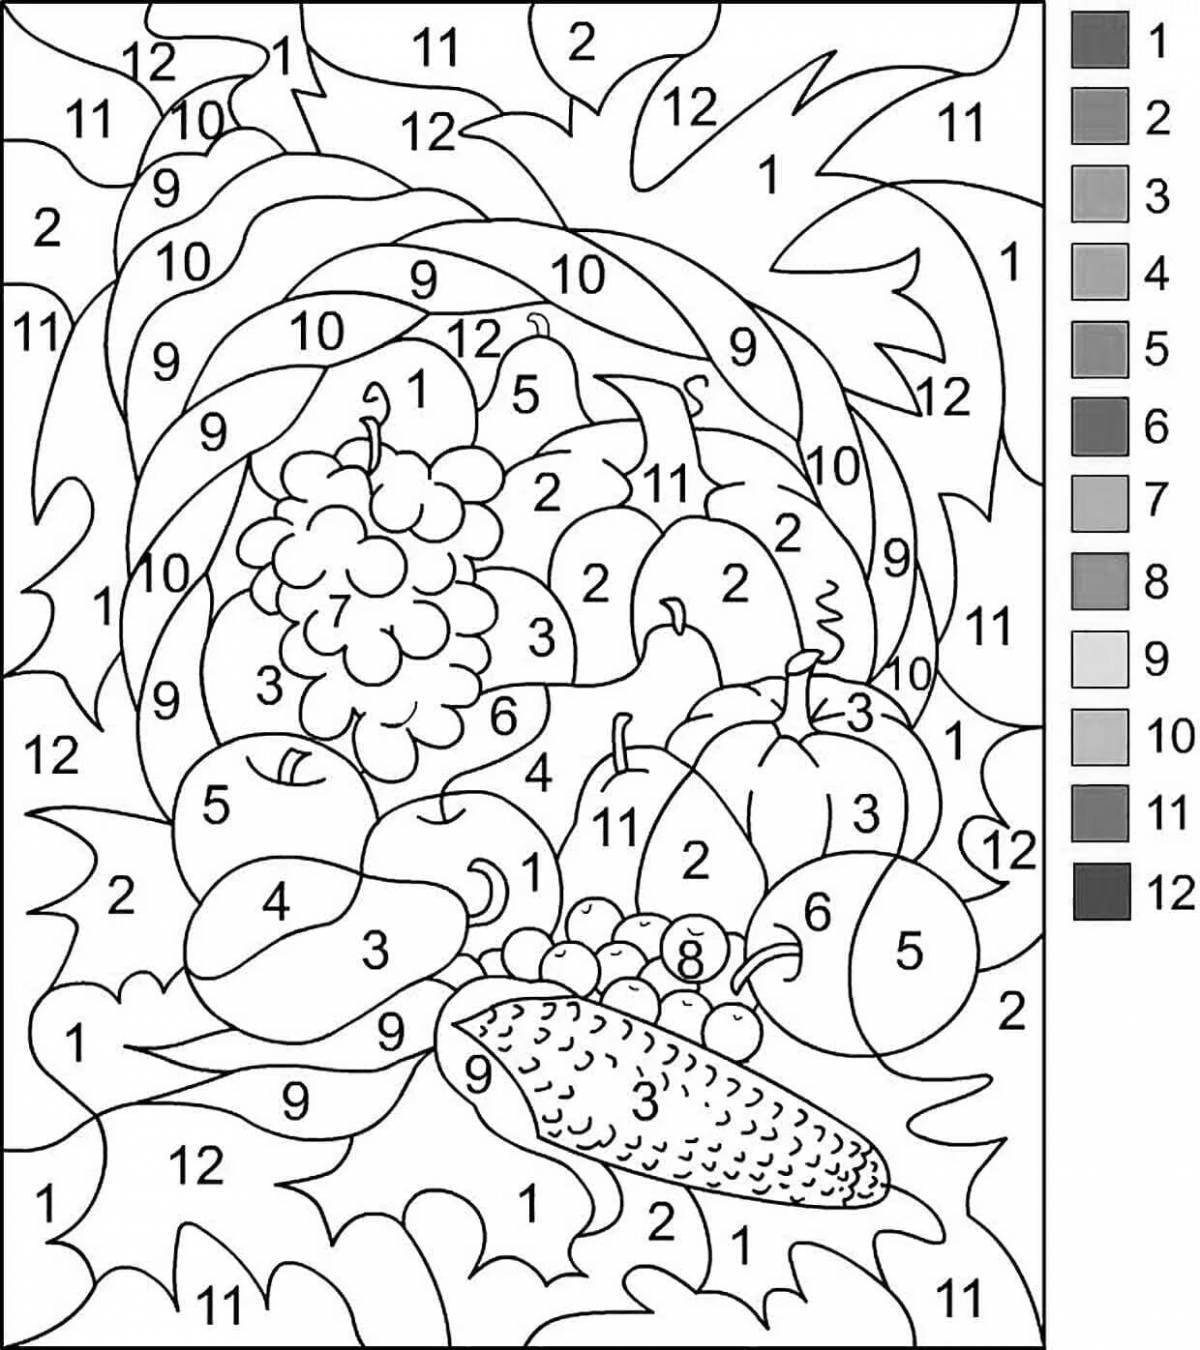 Joyful coloring by numbers for kids